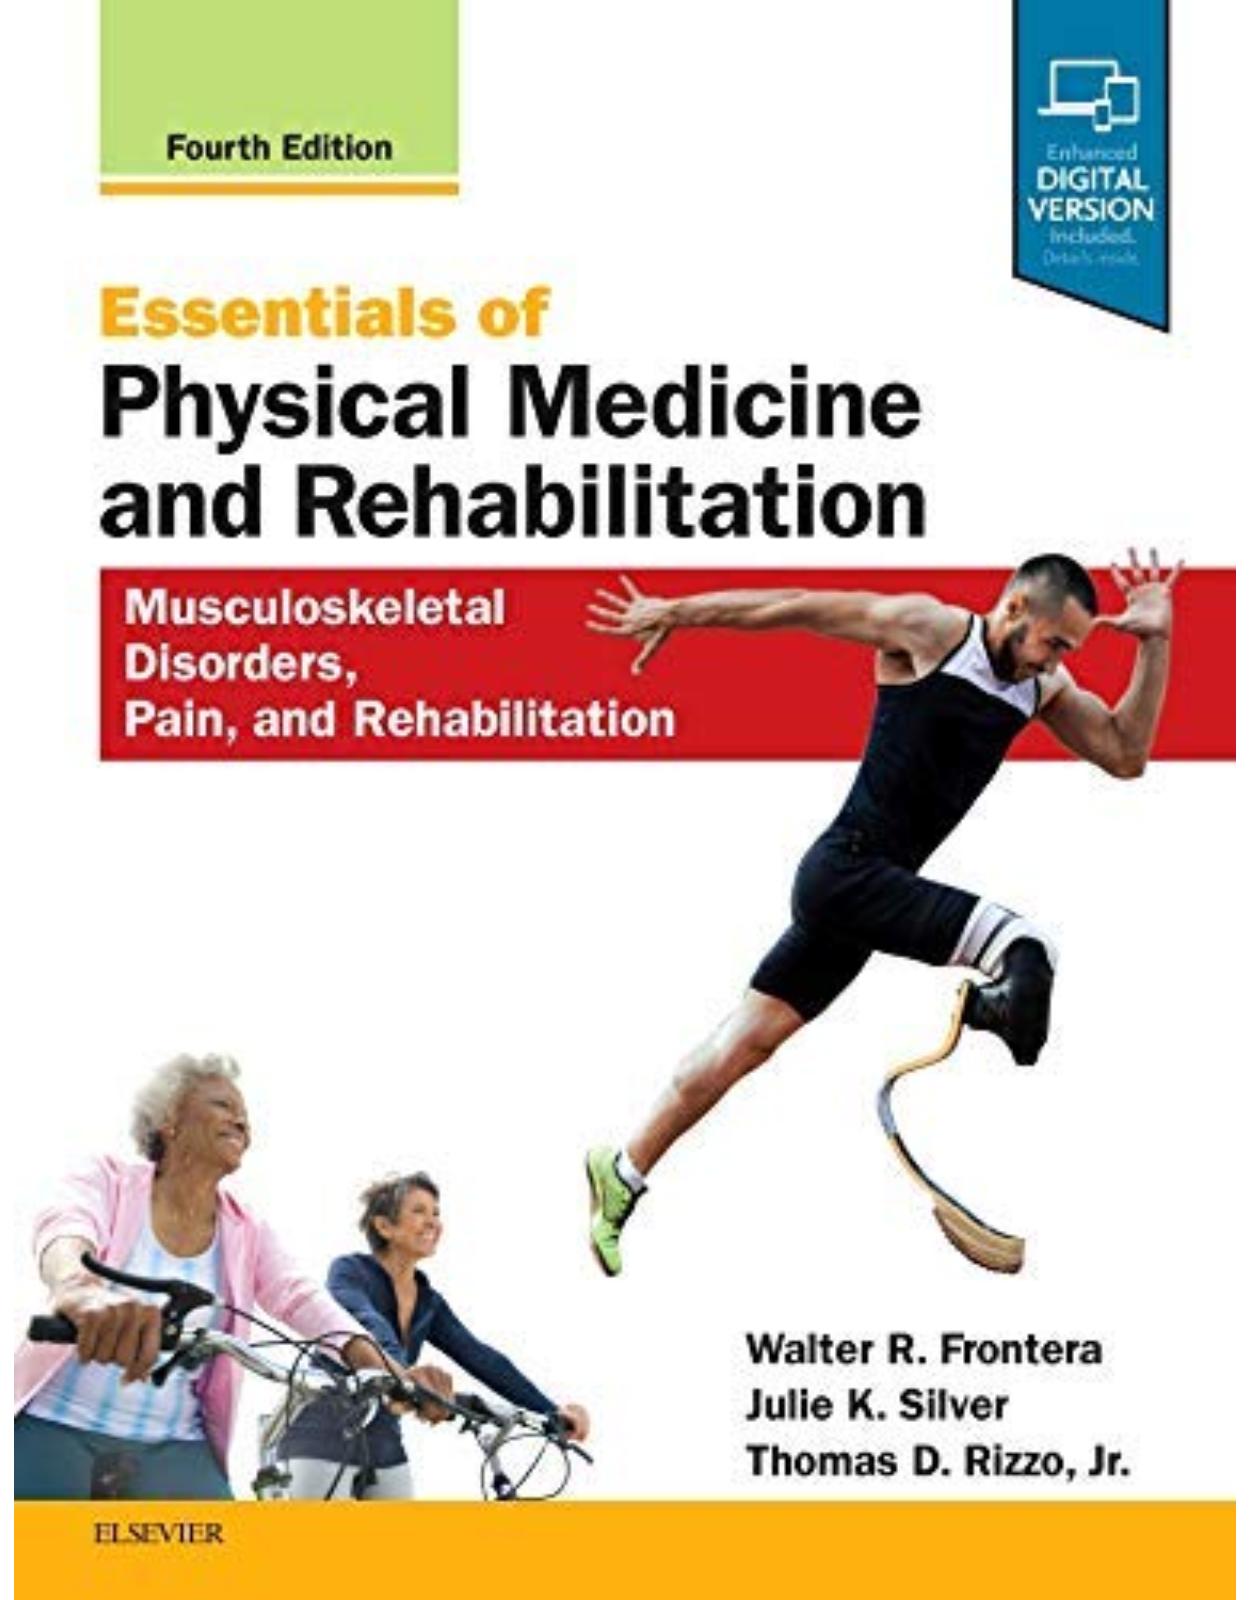 Essentials of Physical Medicine and Rehabilitation, 4th Edition